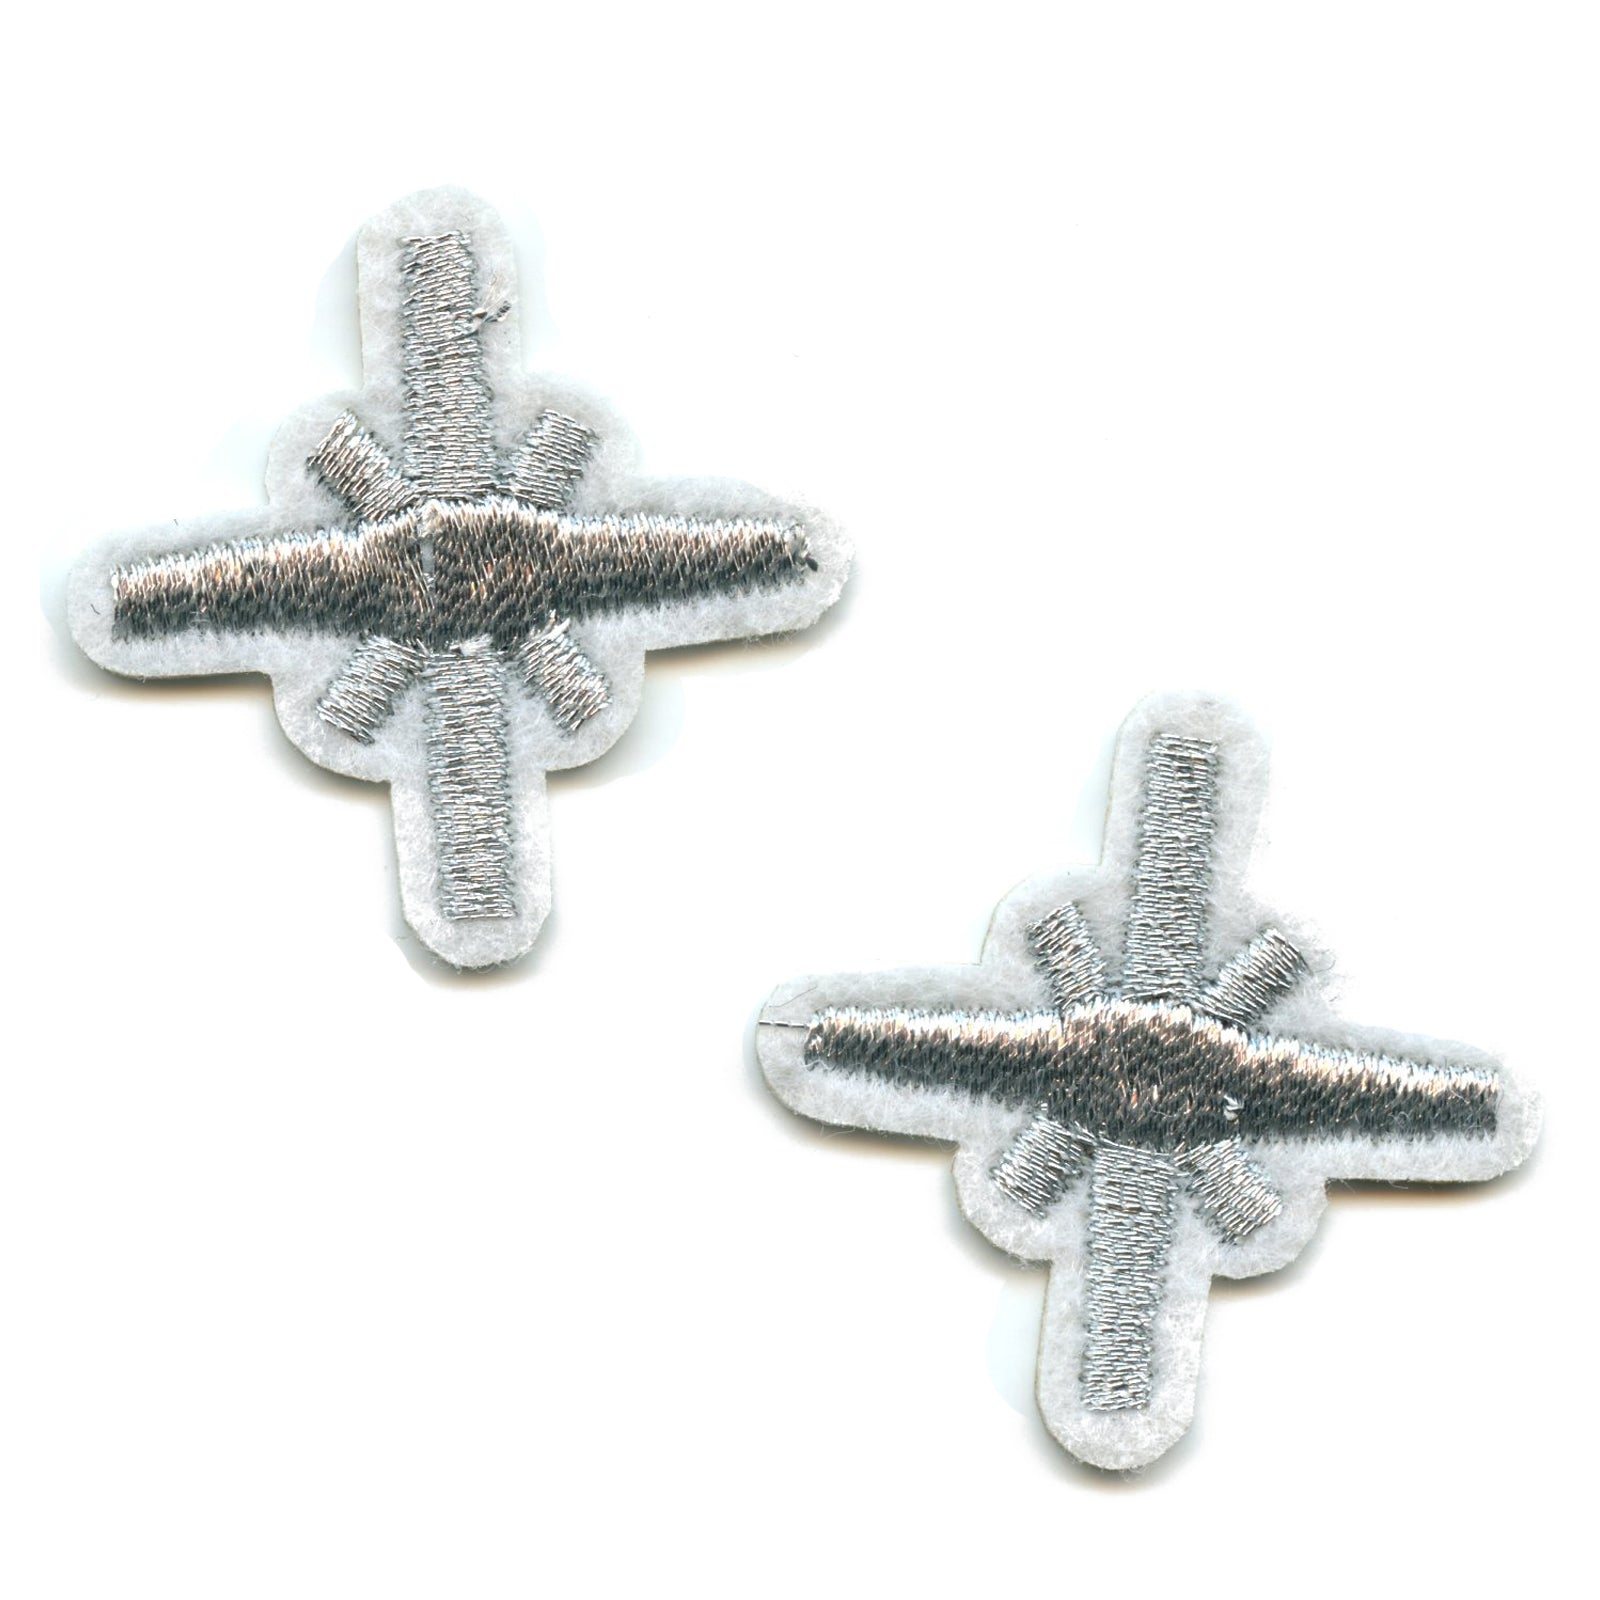 Small Twinkling Silver Stars Embroidered Iron On Patch (2 Pack) 